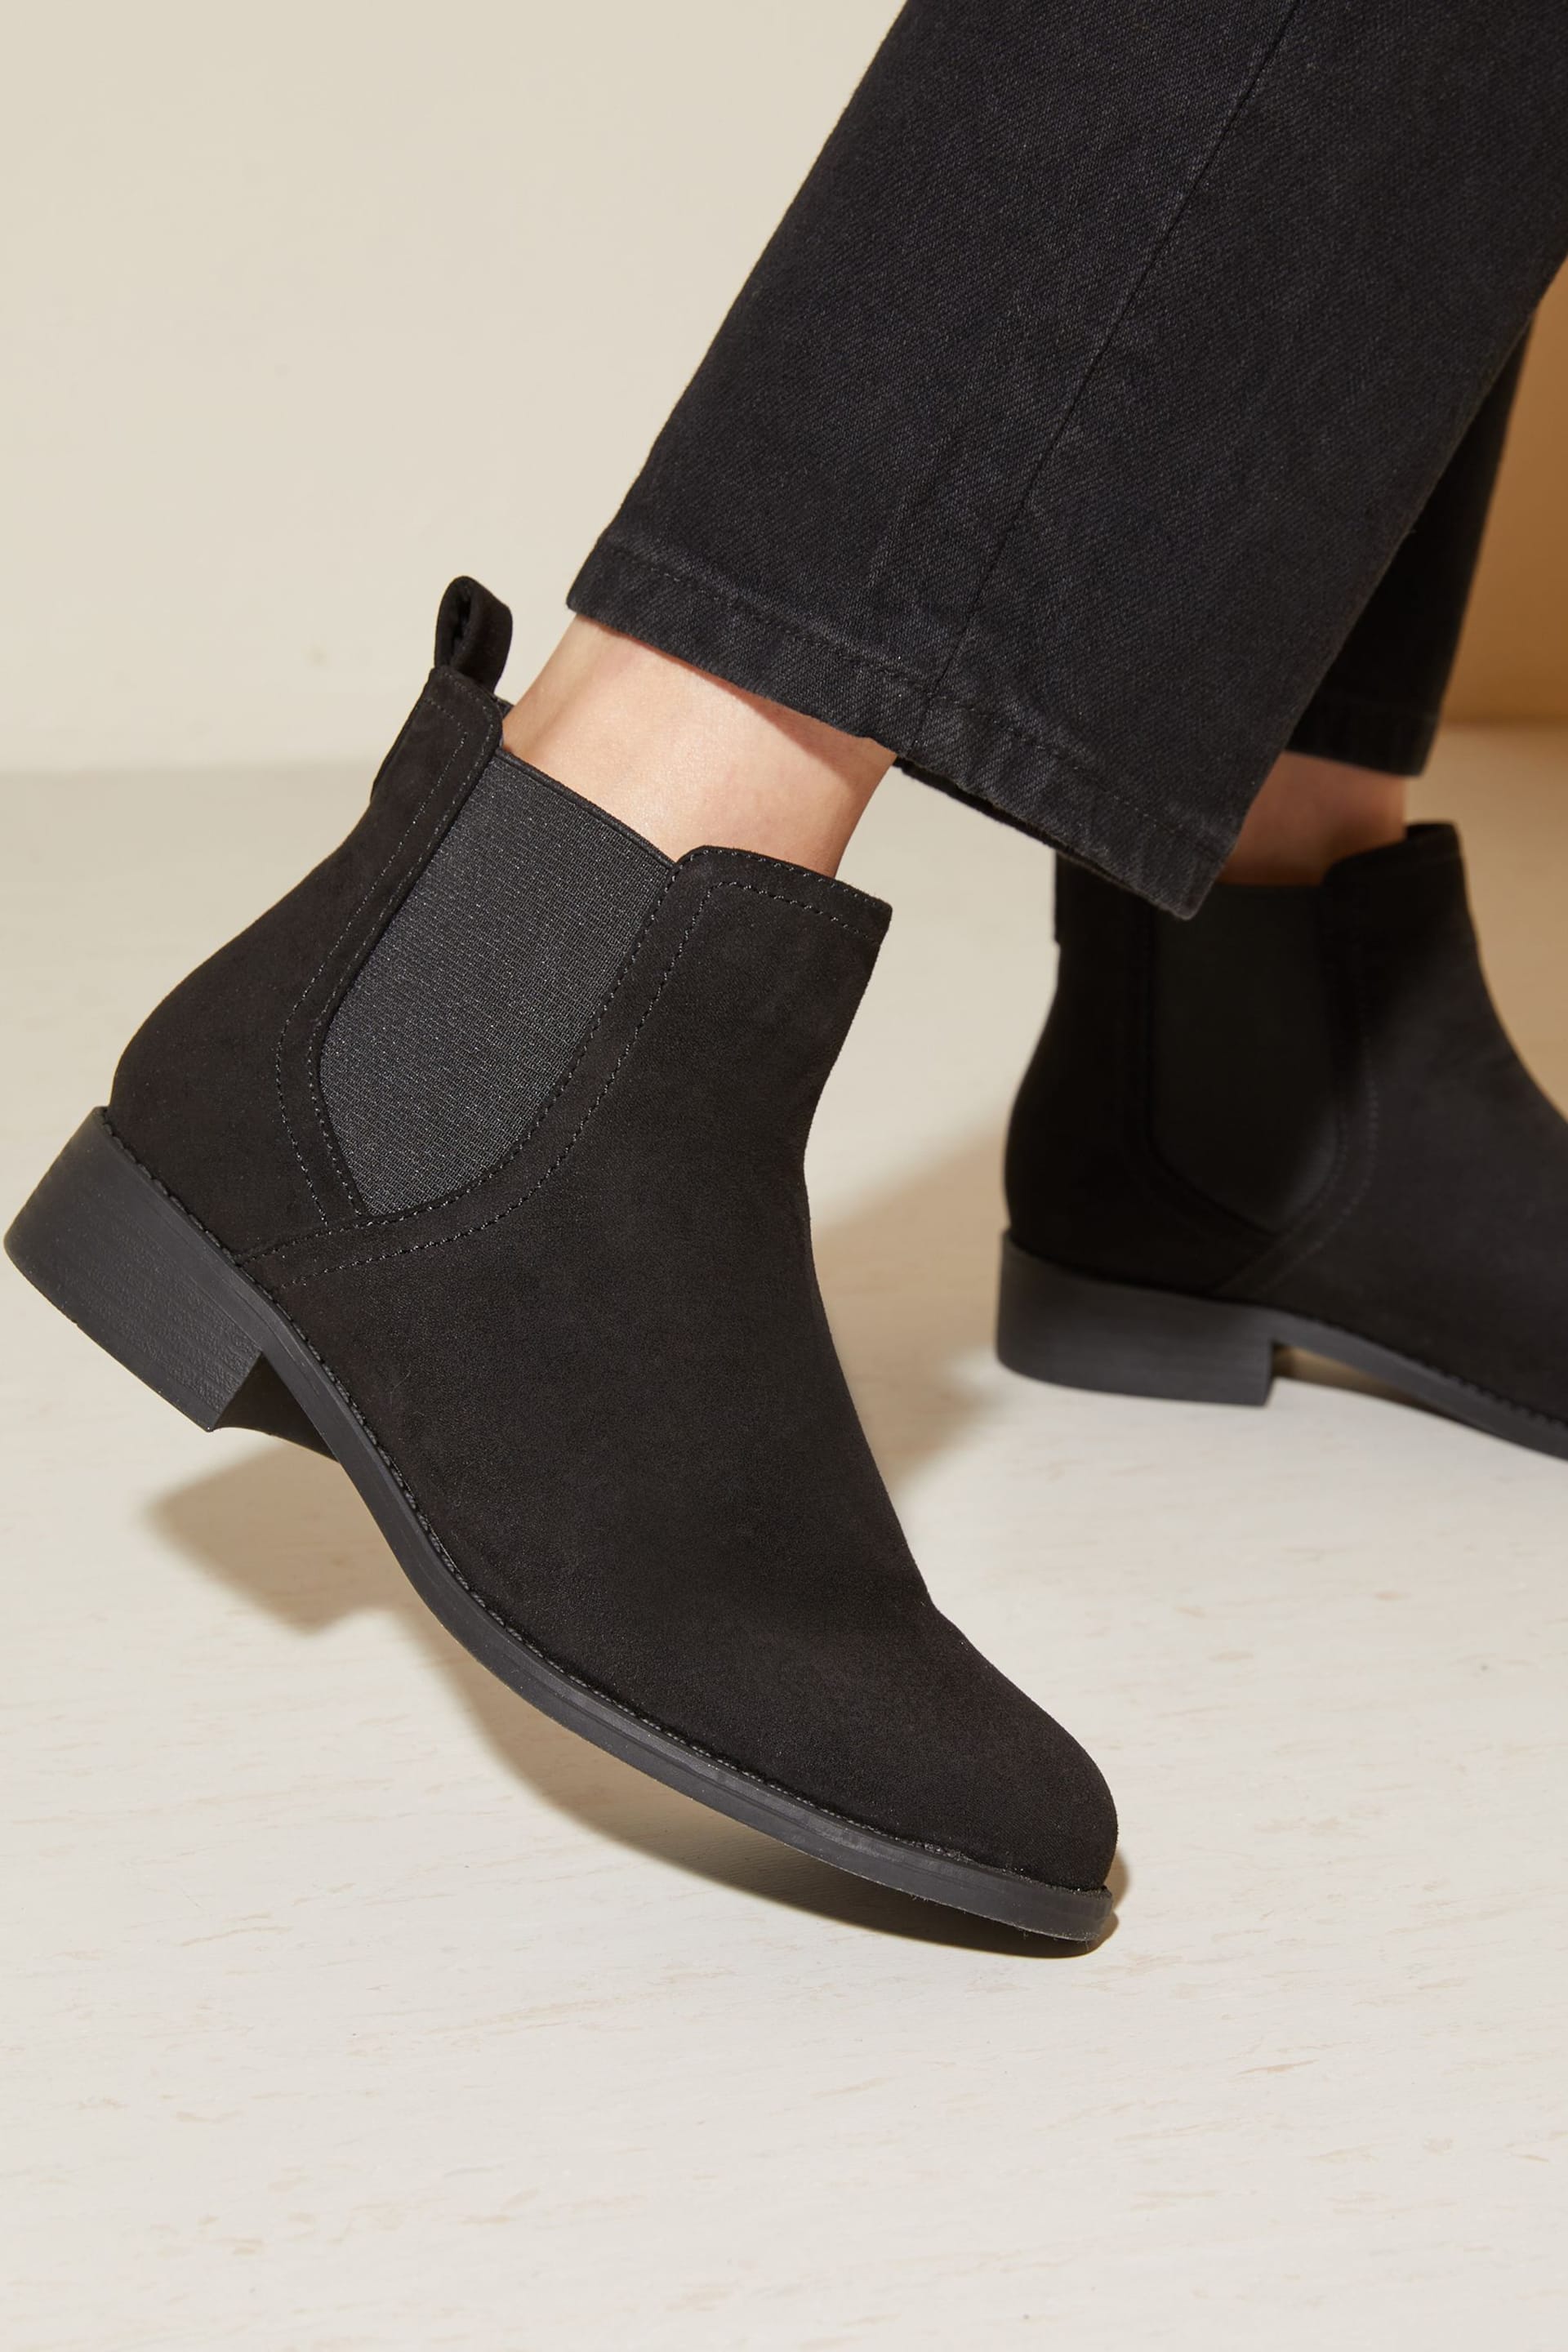 Friends Like These Black Faux Suede Regular Fit Flat Ankle Chelsea Boot - Image 3 of 4